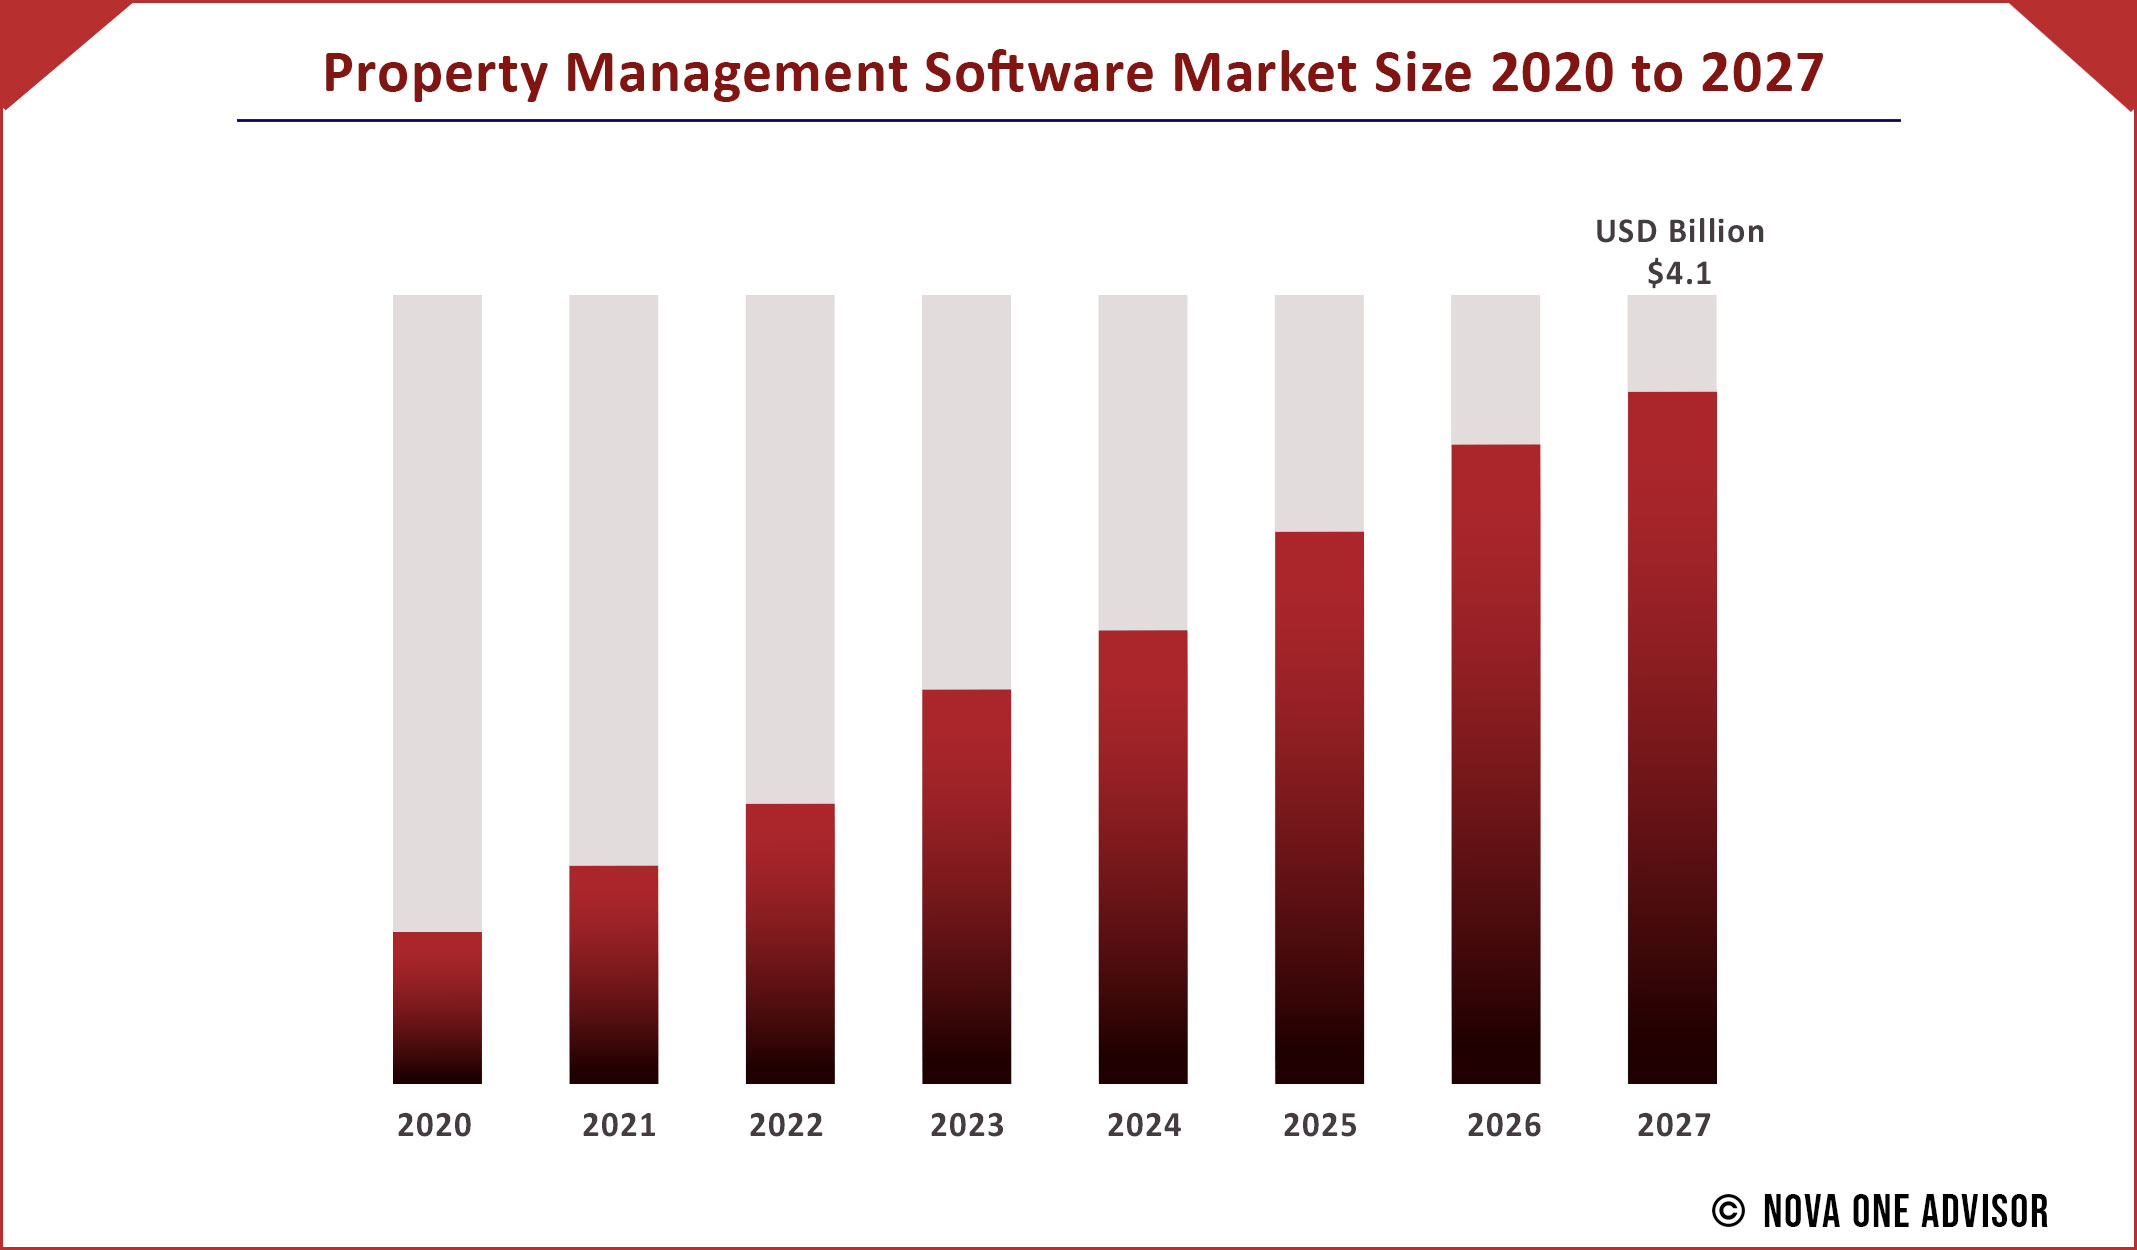 Property Management Software Market Size 2020 to 2027